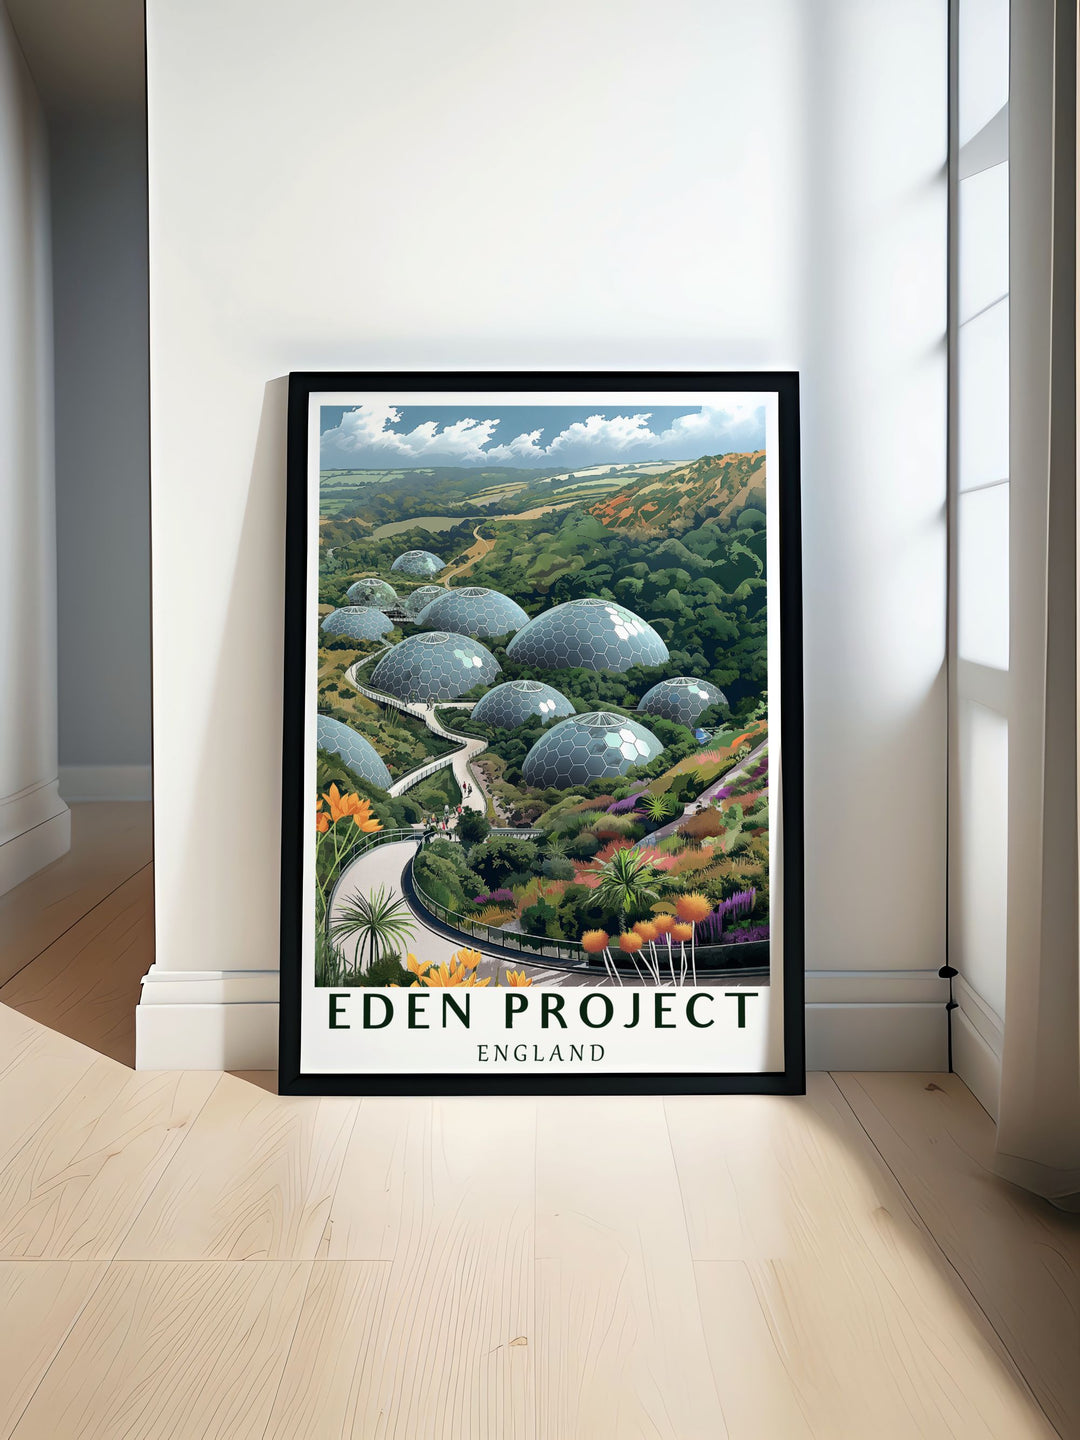 Eden Project wall art featuring vibrant botanical displays ideal for adding a touch of nature to your home decor perfect for nature lovers and those who appreciate stunning gardens. Enhance your living space with this beautiful Eden Project print.